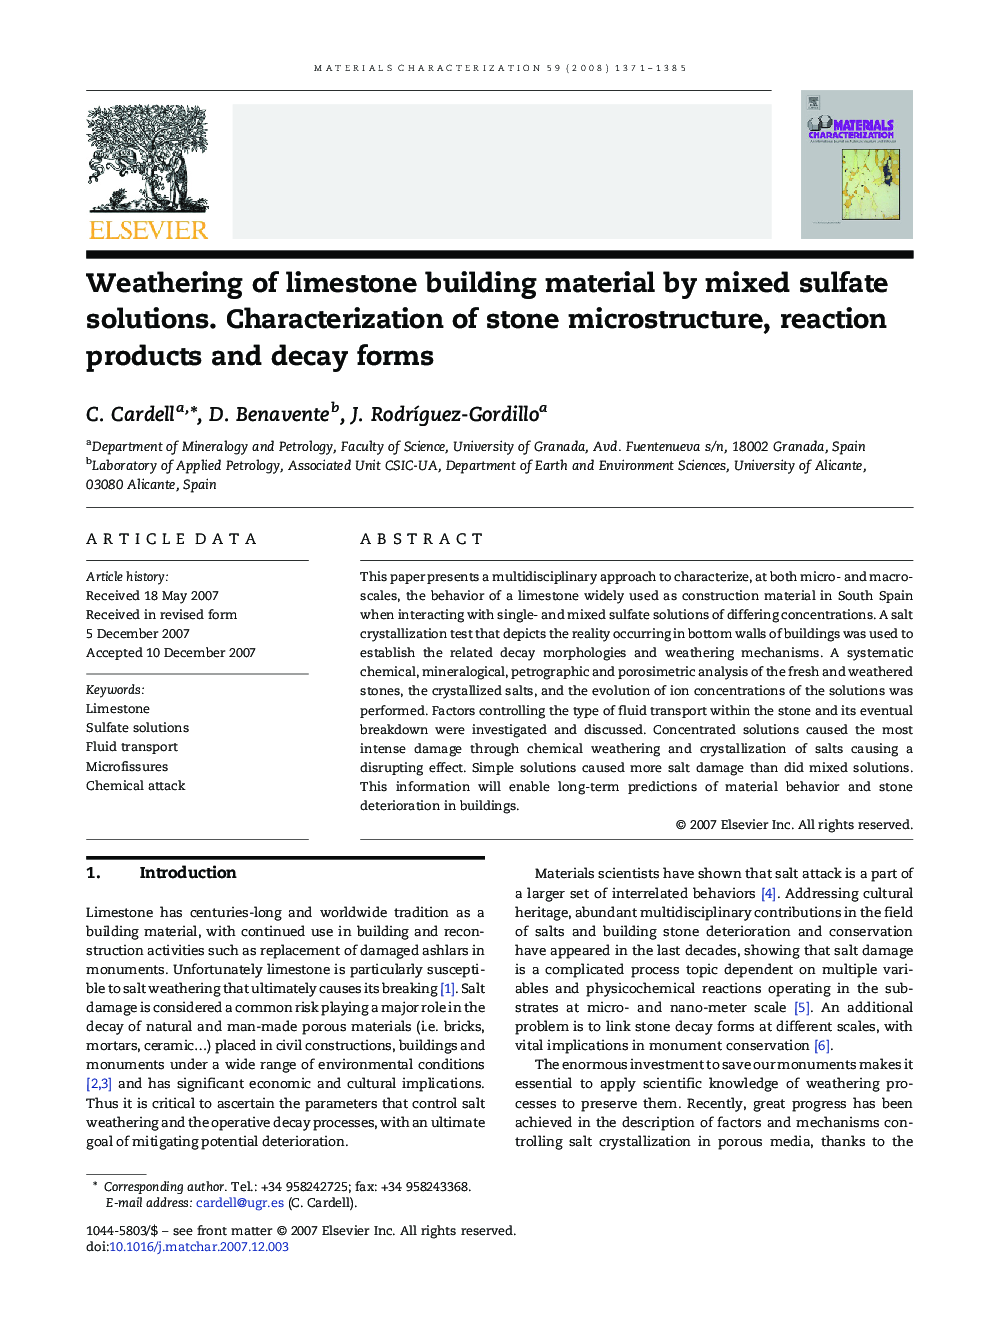 Weathering of limestone building material by mixed sulfate solutions. Characterization of stone microstructure, reaction products and decay forms